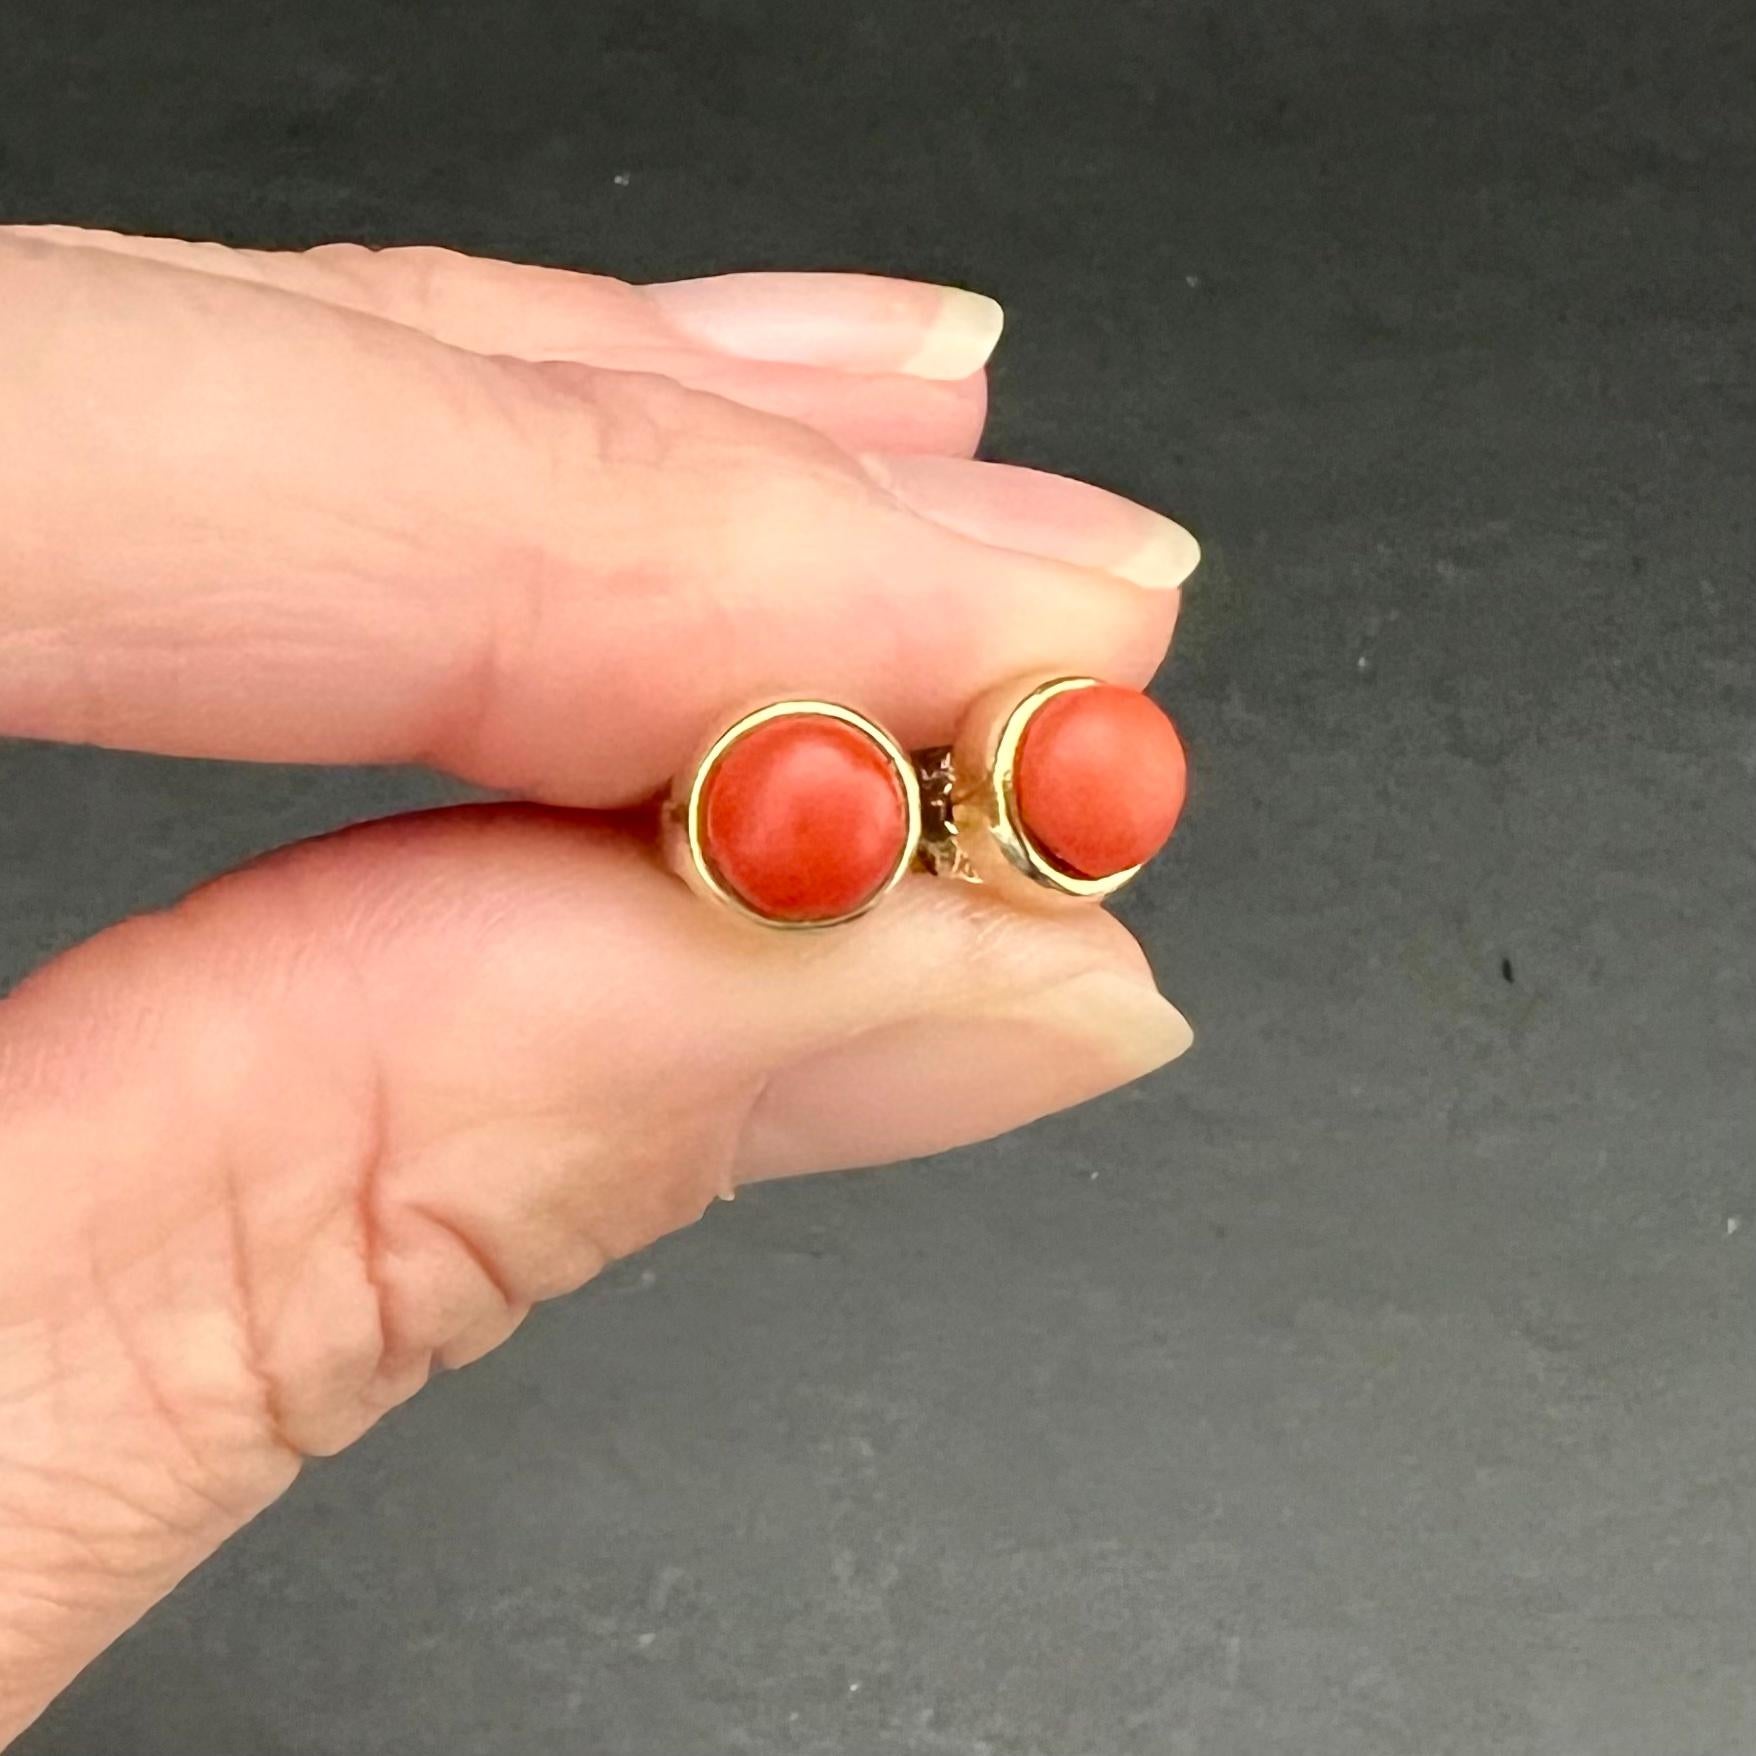 A lovely pair of vintage natural red coral and gold stud earrings. The coral studs are bezel set in a 14 karat gold mounting. The gold mounting has a smooth setting crafted around a red coral cabochon stone. The stones have a beautiful red color and